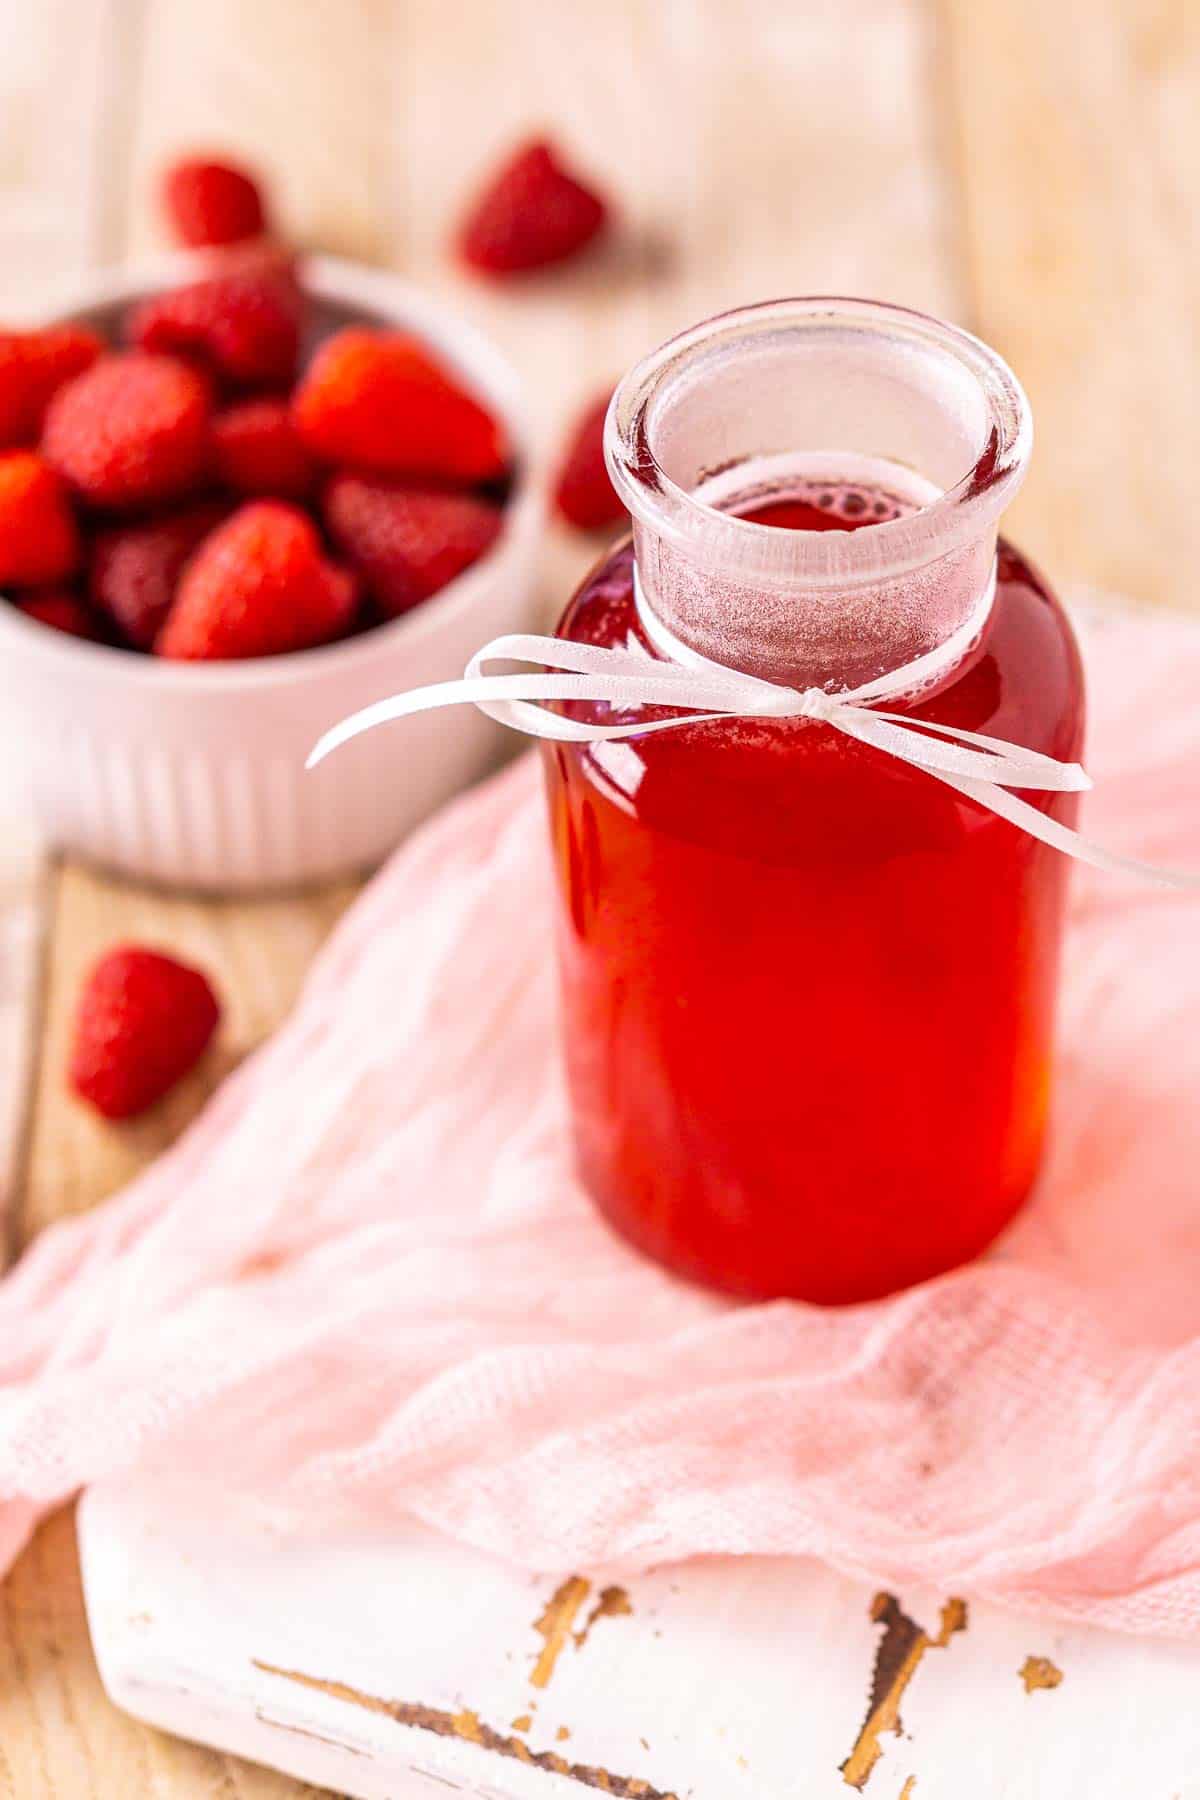 A bottle of raspberry simple syrup on a white tray with a piece of pink clothe and a small bowl of berries to the left.